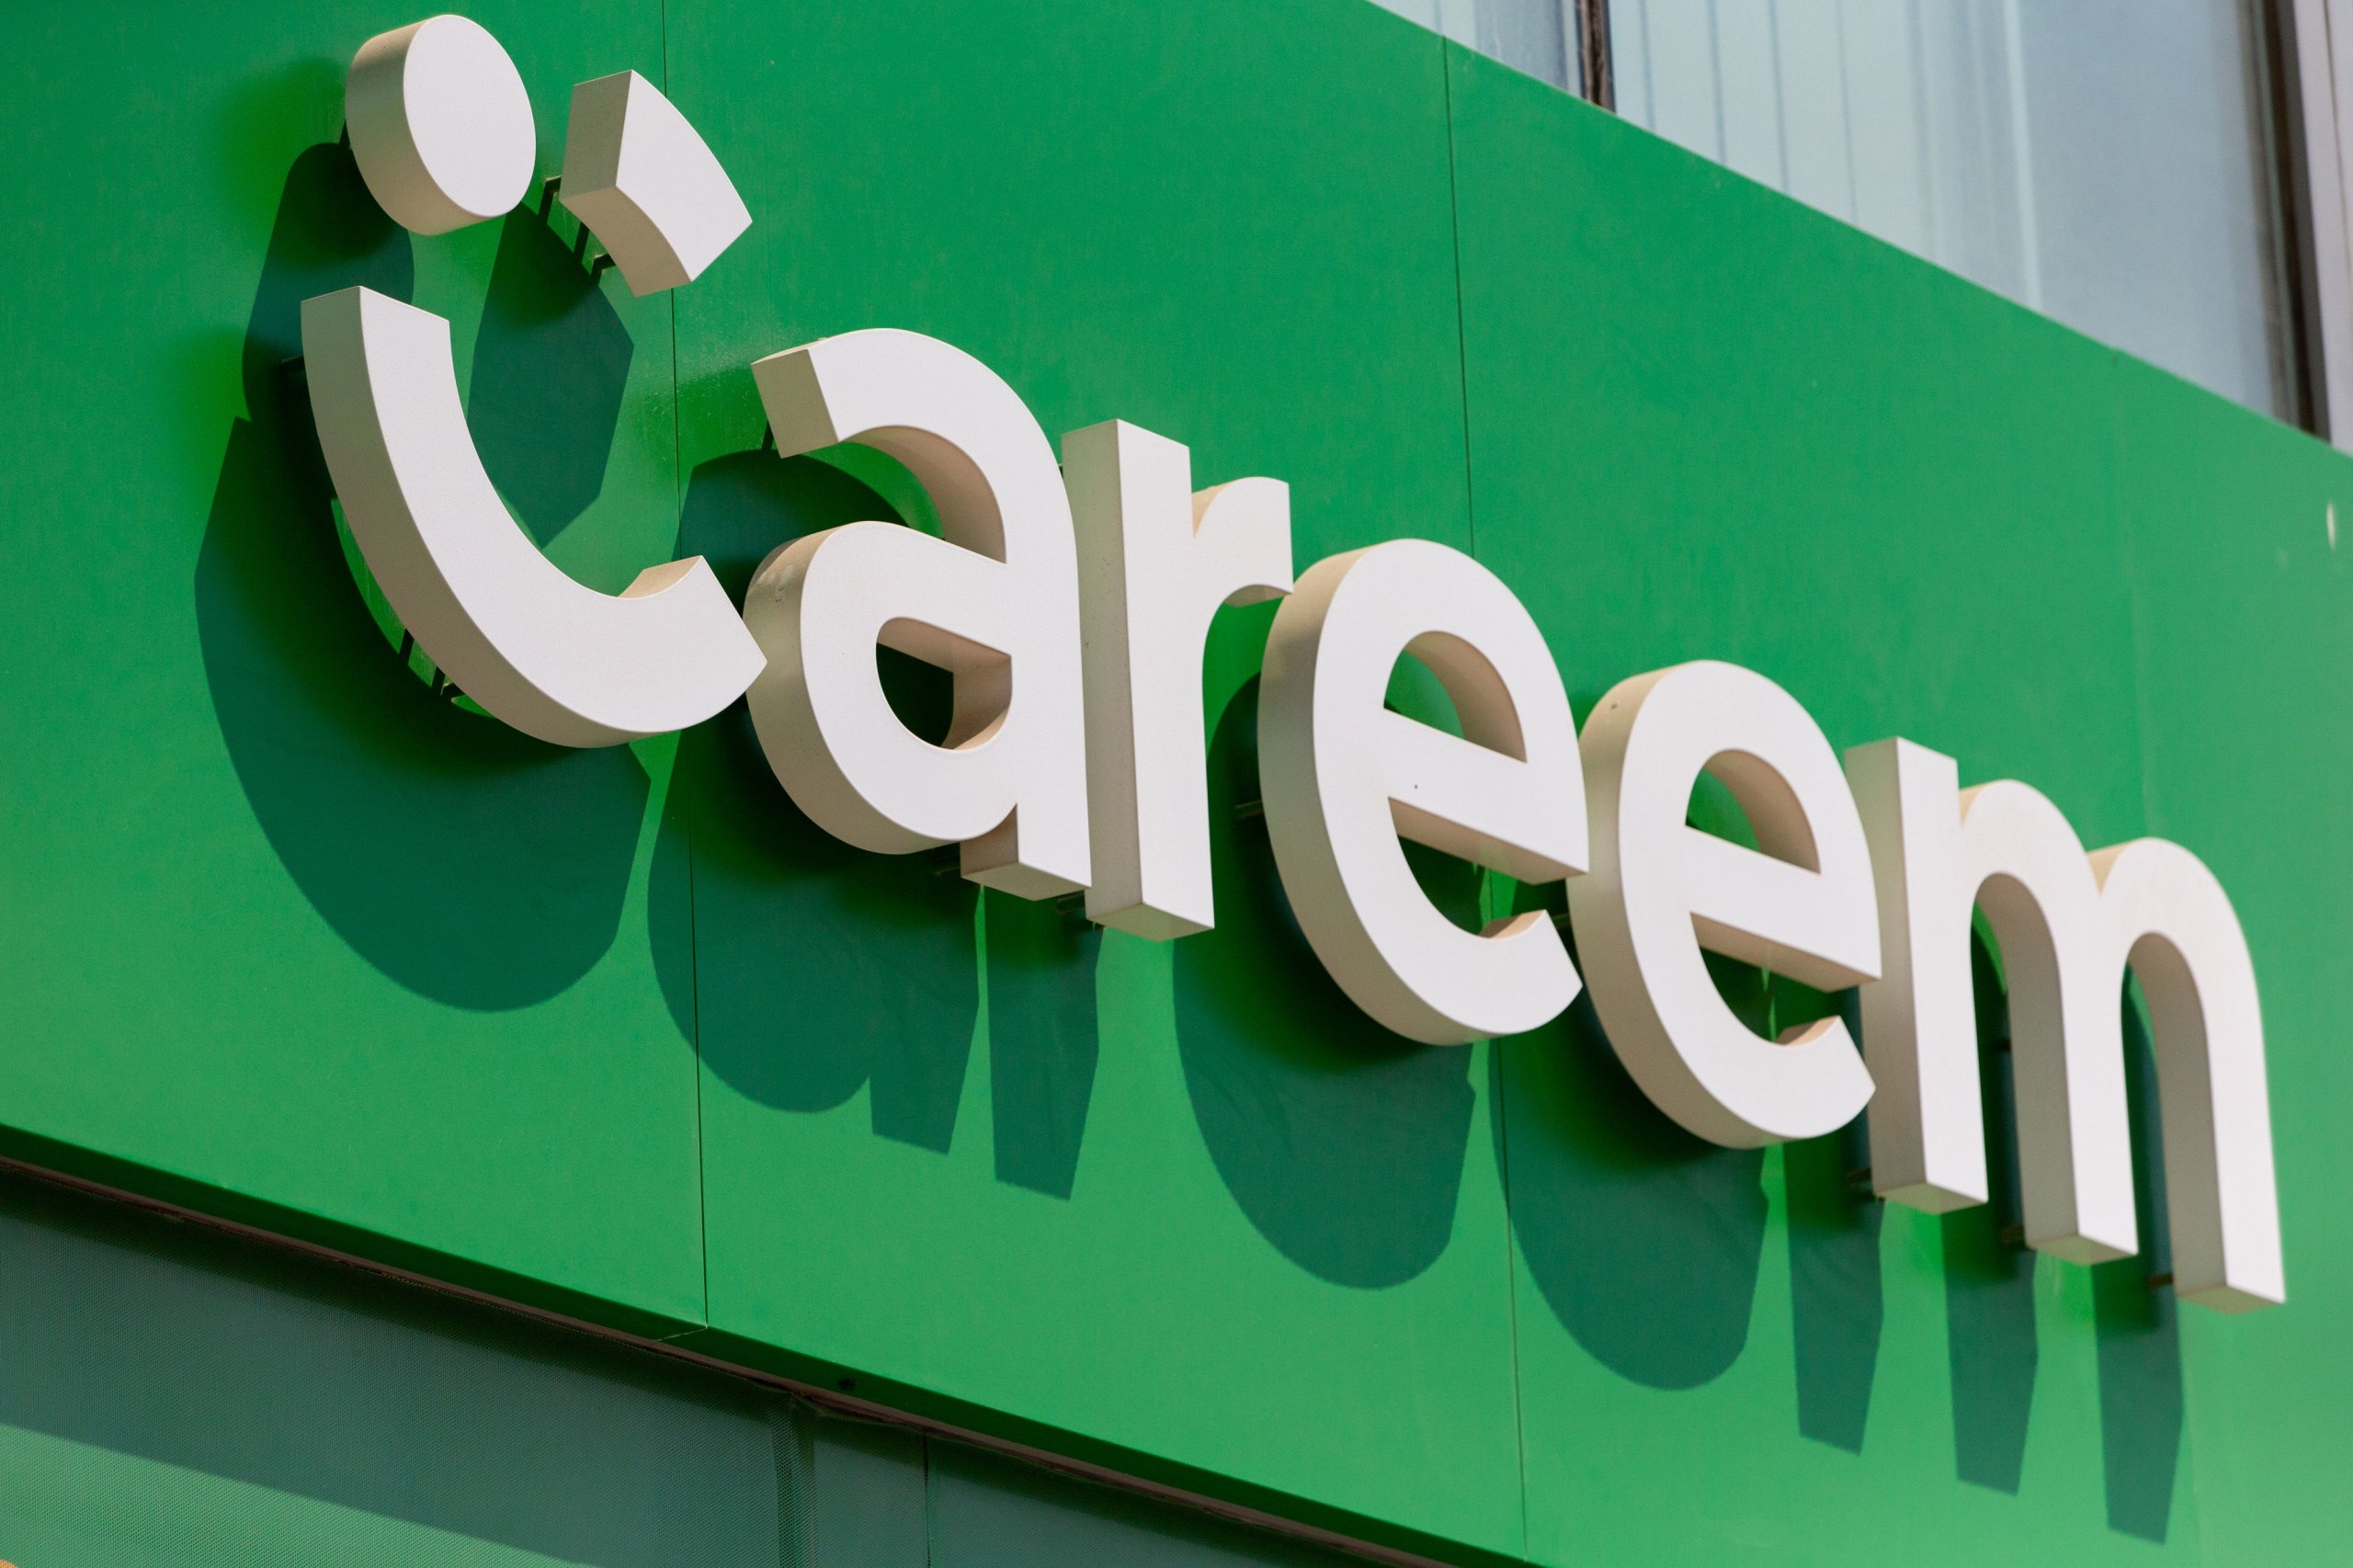 Careem lays off 31% of its workforce due to COVID-19